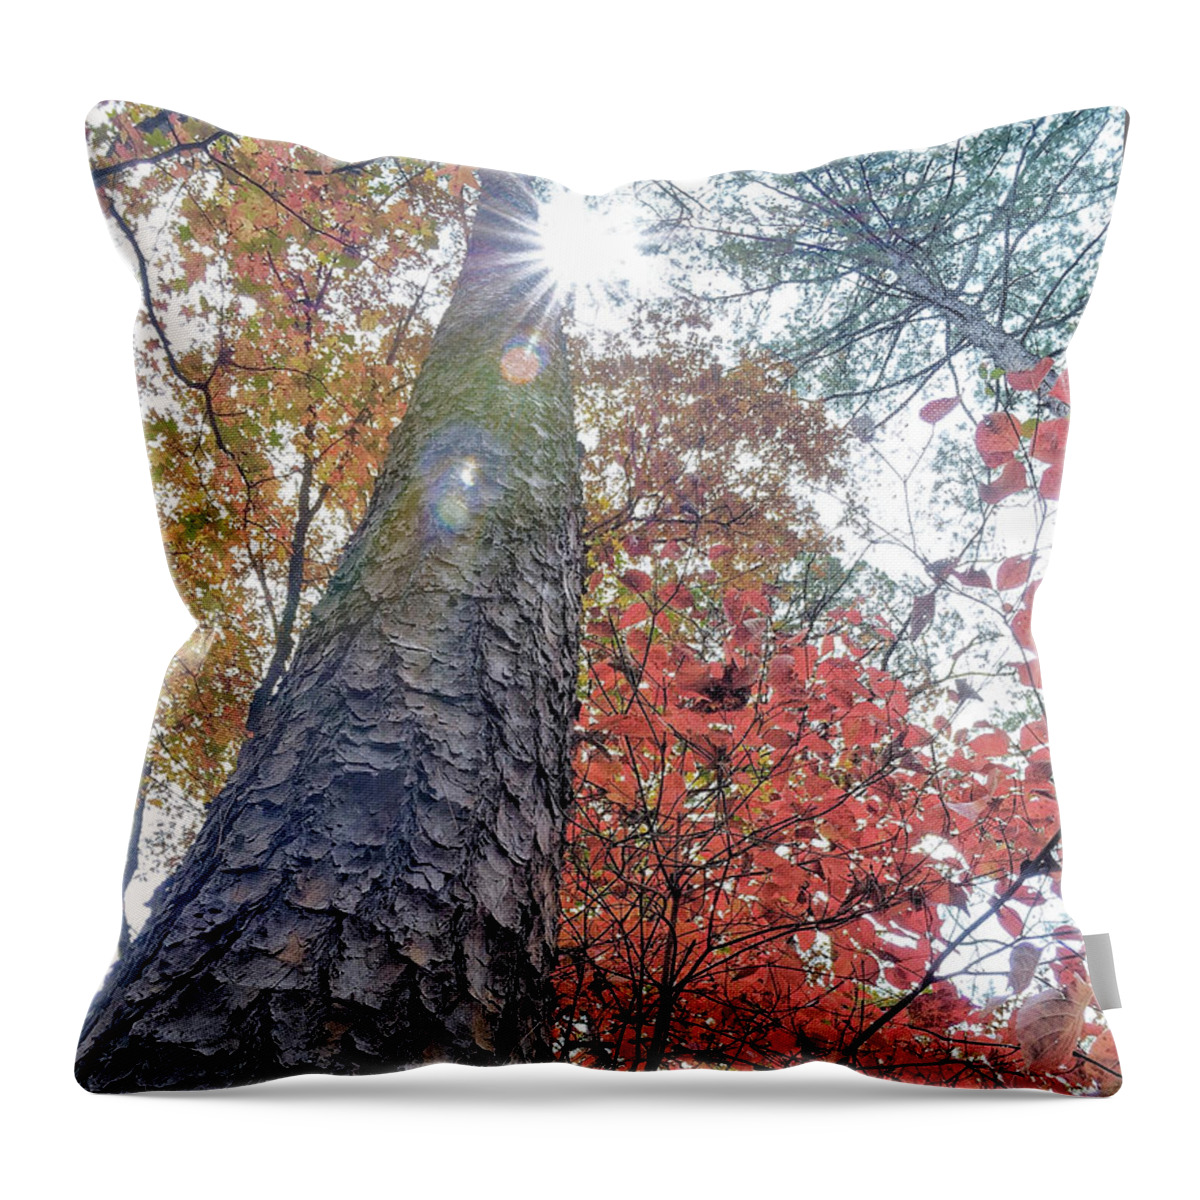 Starburst Throw Pillow featuring the photograph Looking Up by Doris Aguirre